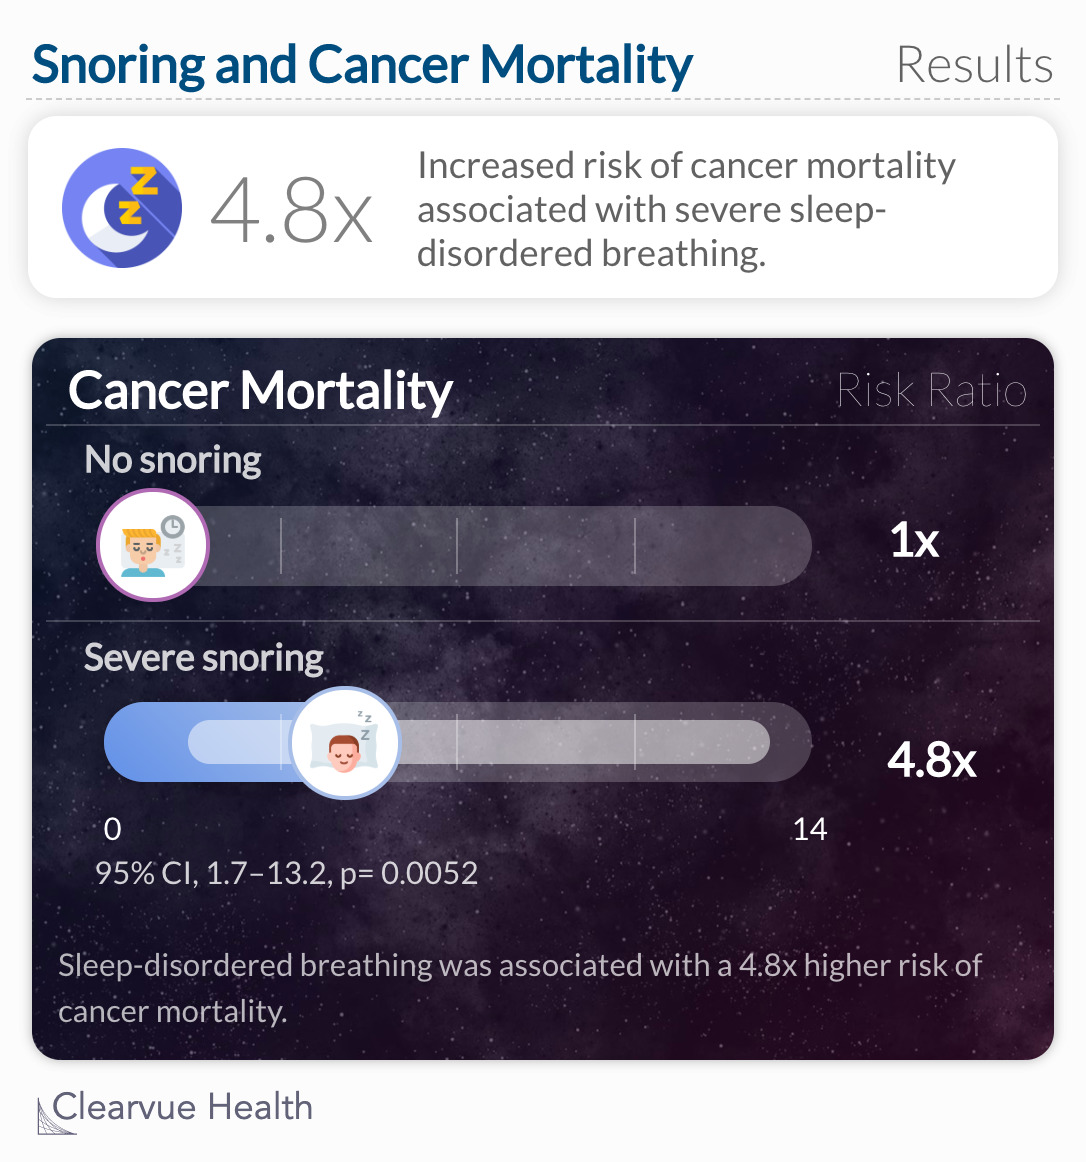 4.8x increased risk of cancer mortality associated with severe sleep-disordered breathing. 